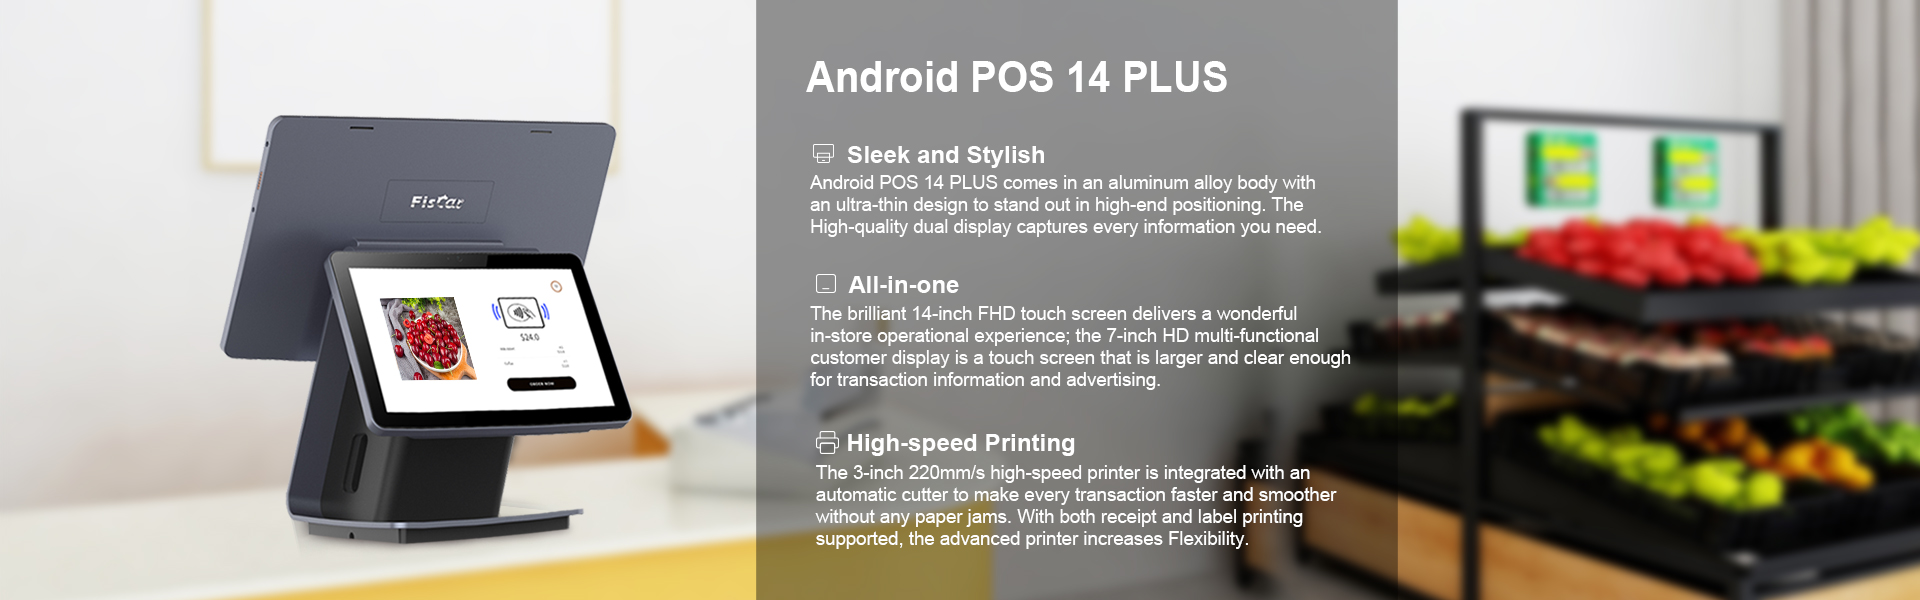 Android POS 14 PLUS